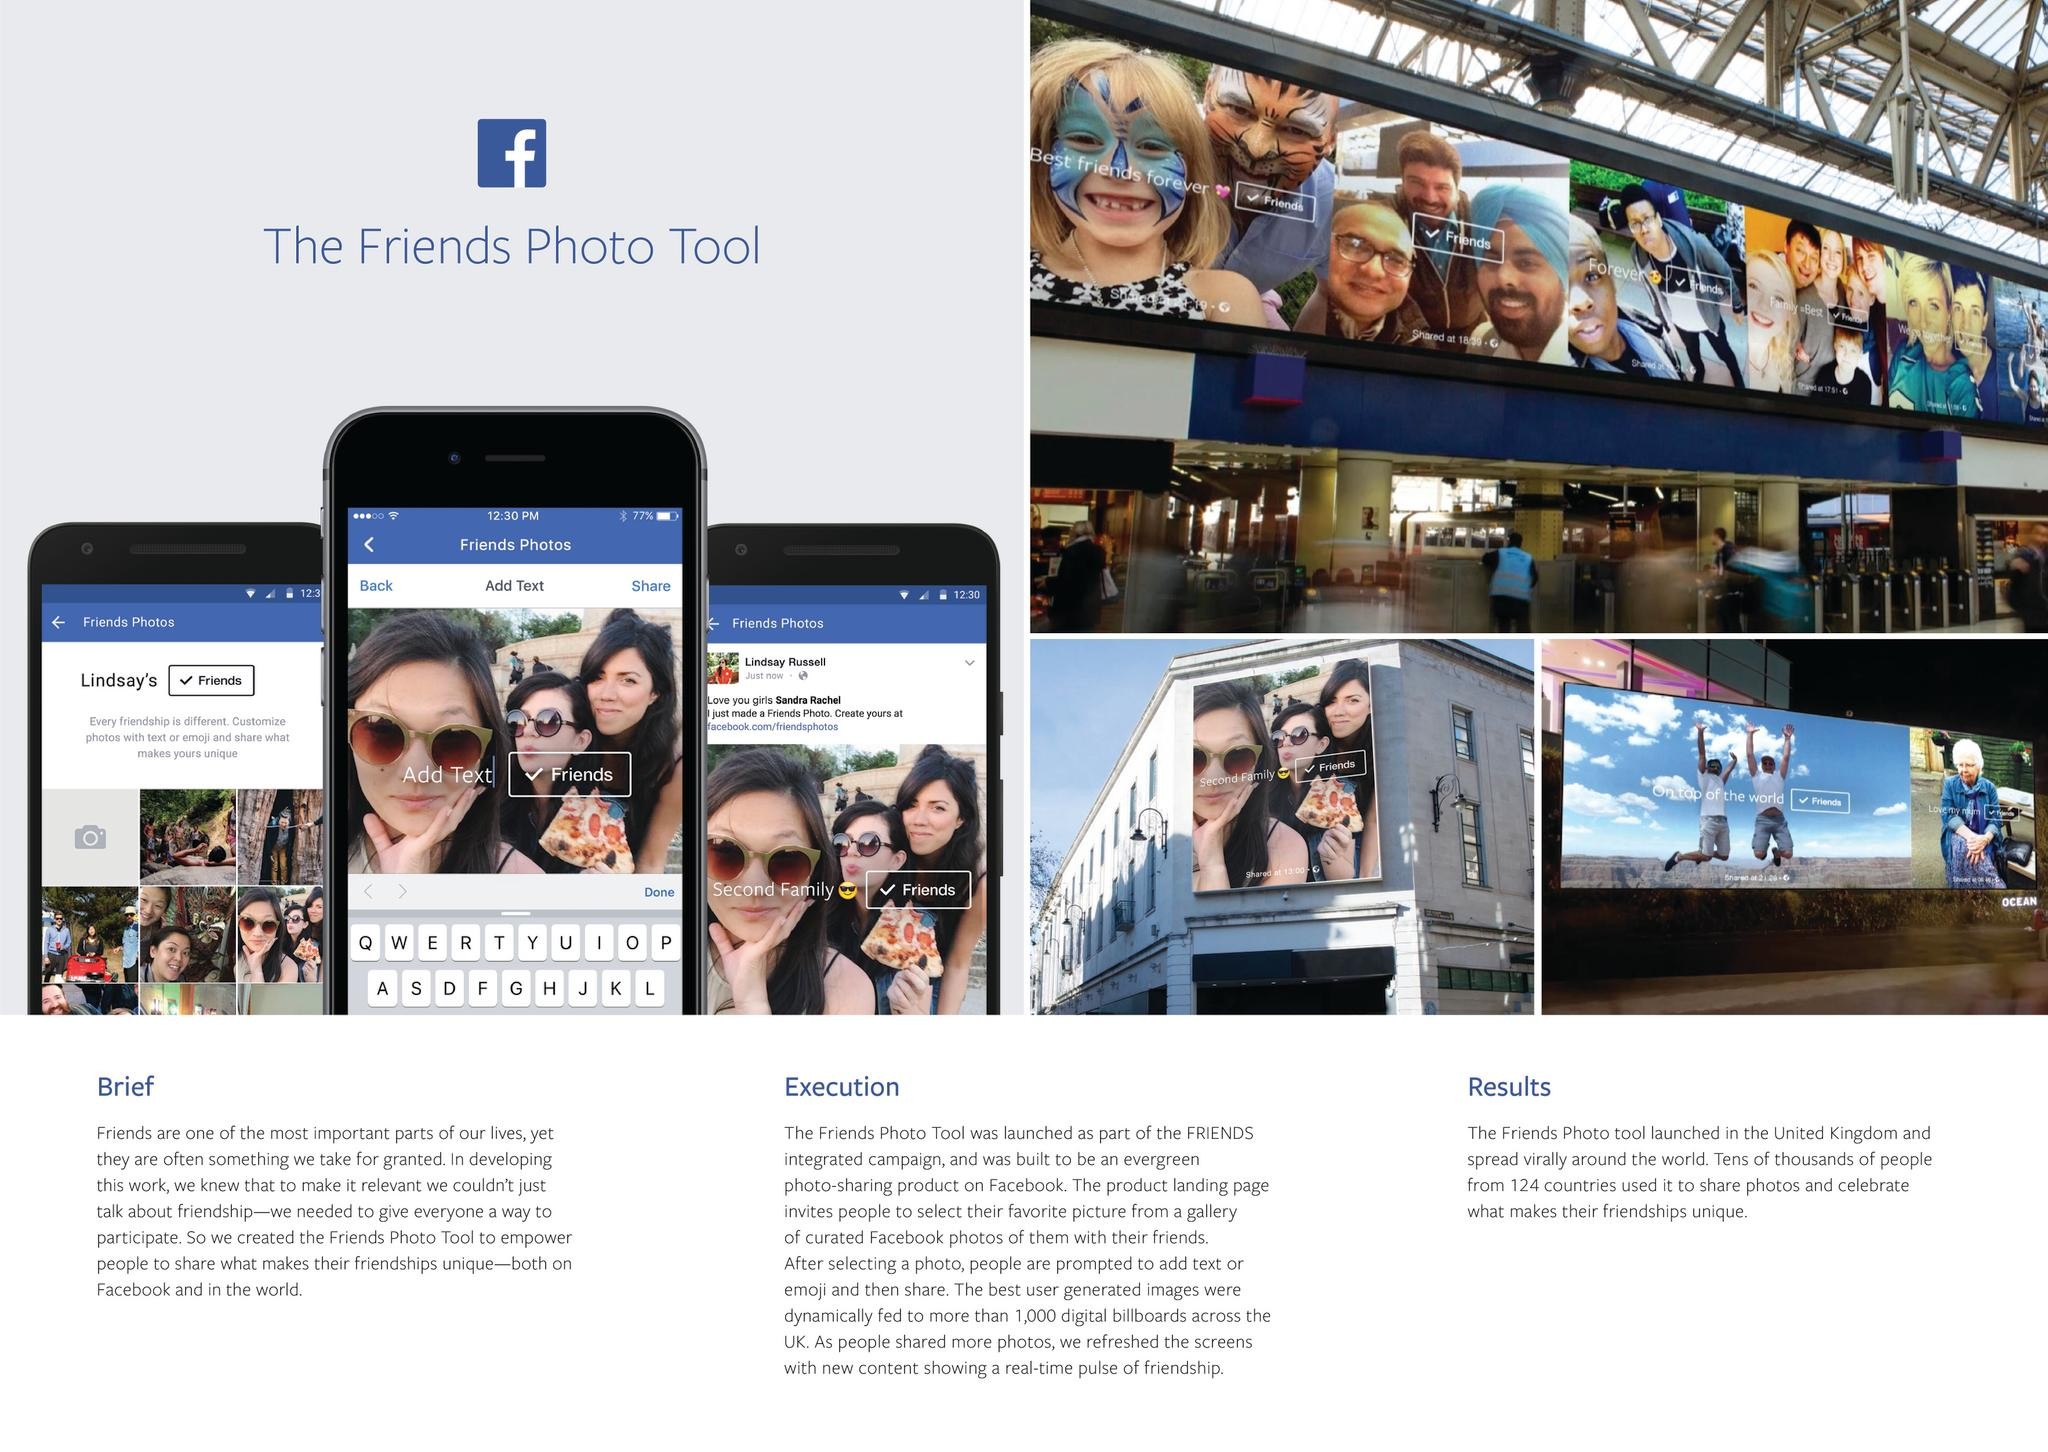 The Friends Photo Tool from Facebook